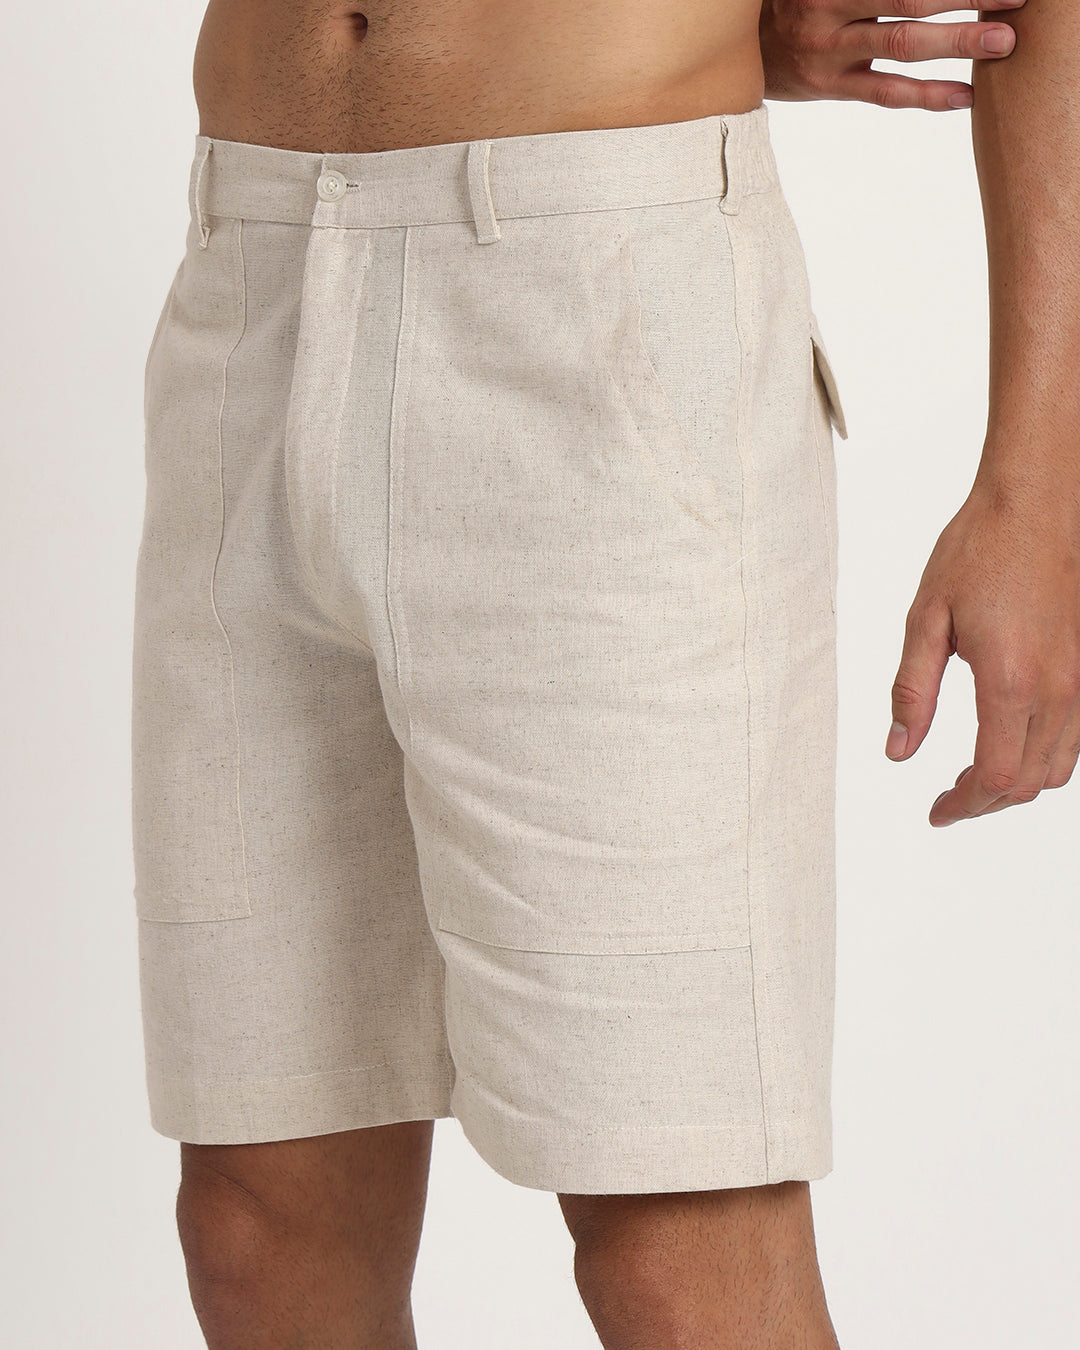 Combo : Patch Pocket Playtime Beige & Midnight Blue Men's Shorts